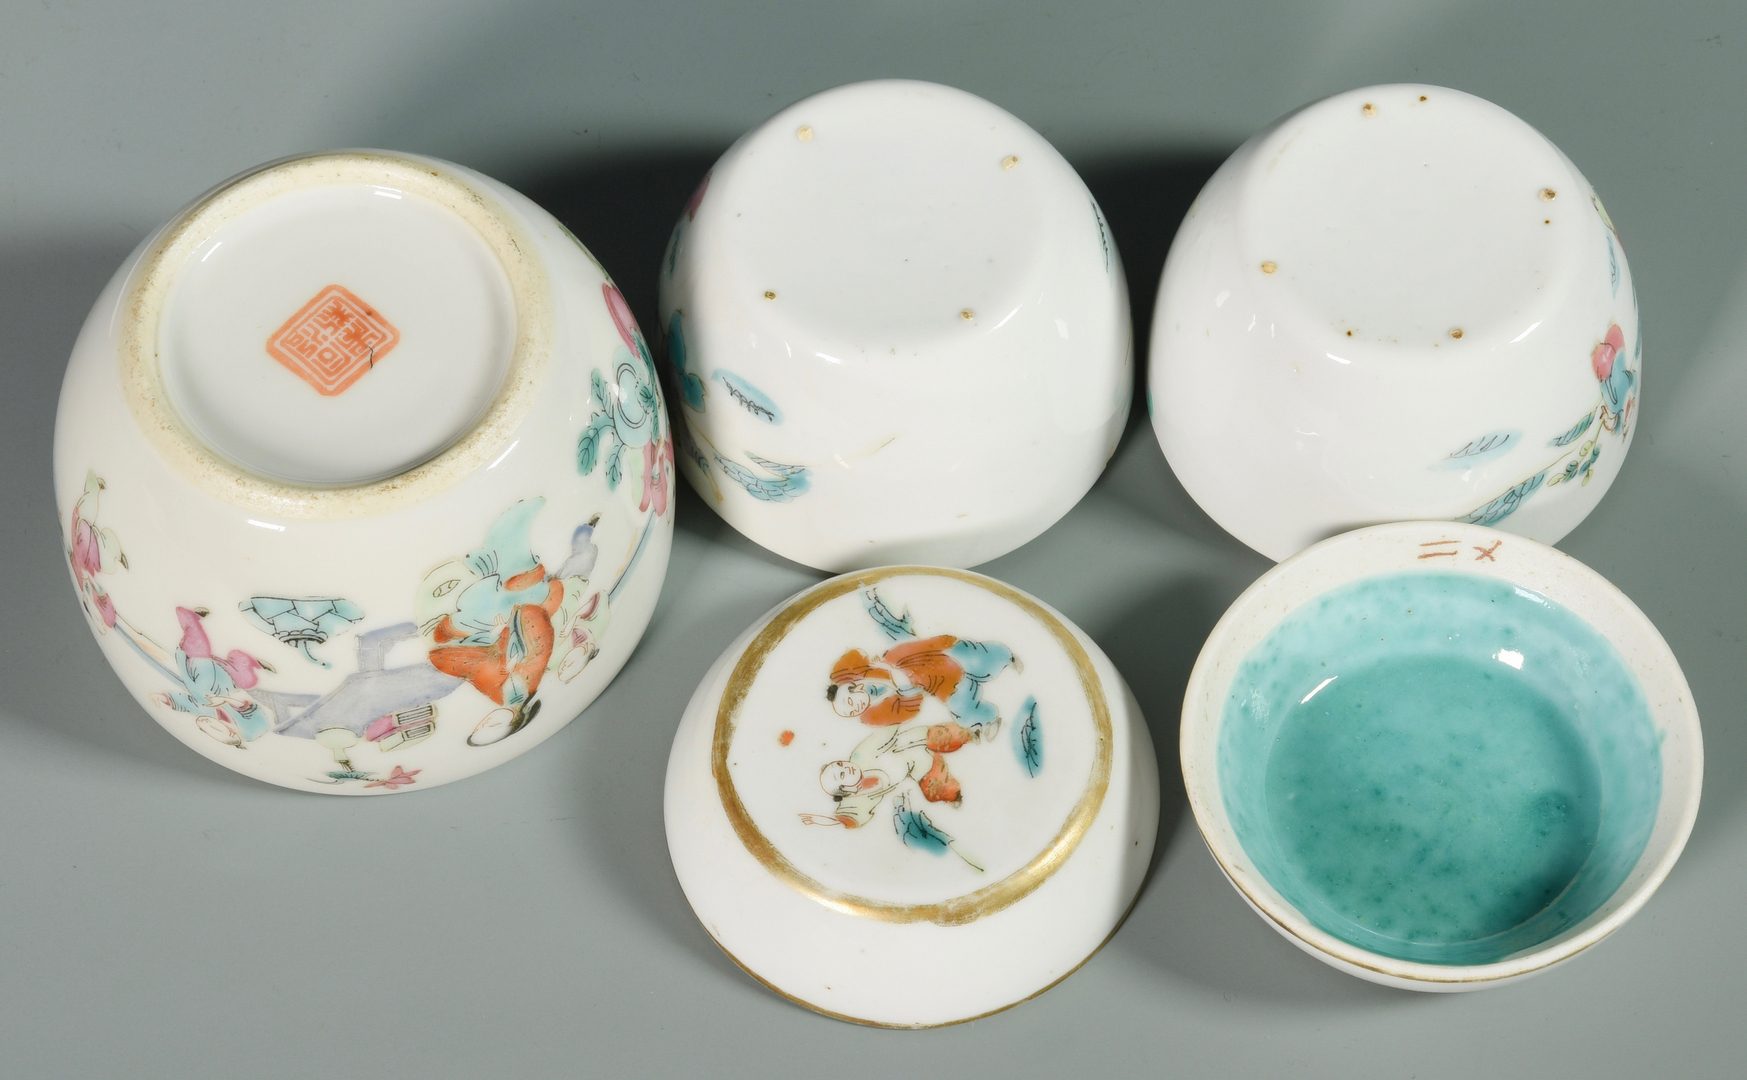 Lot 346: Grouping of Asian Porcelain & Pottery Items, 13 pcs.